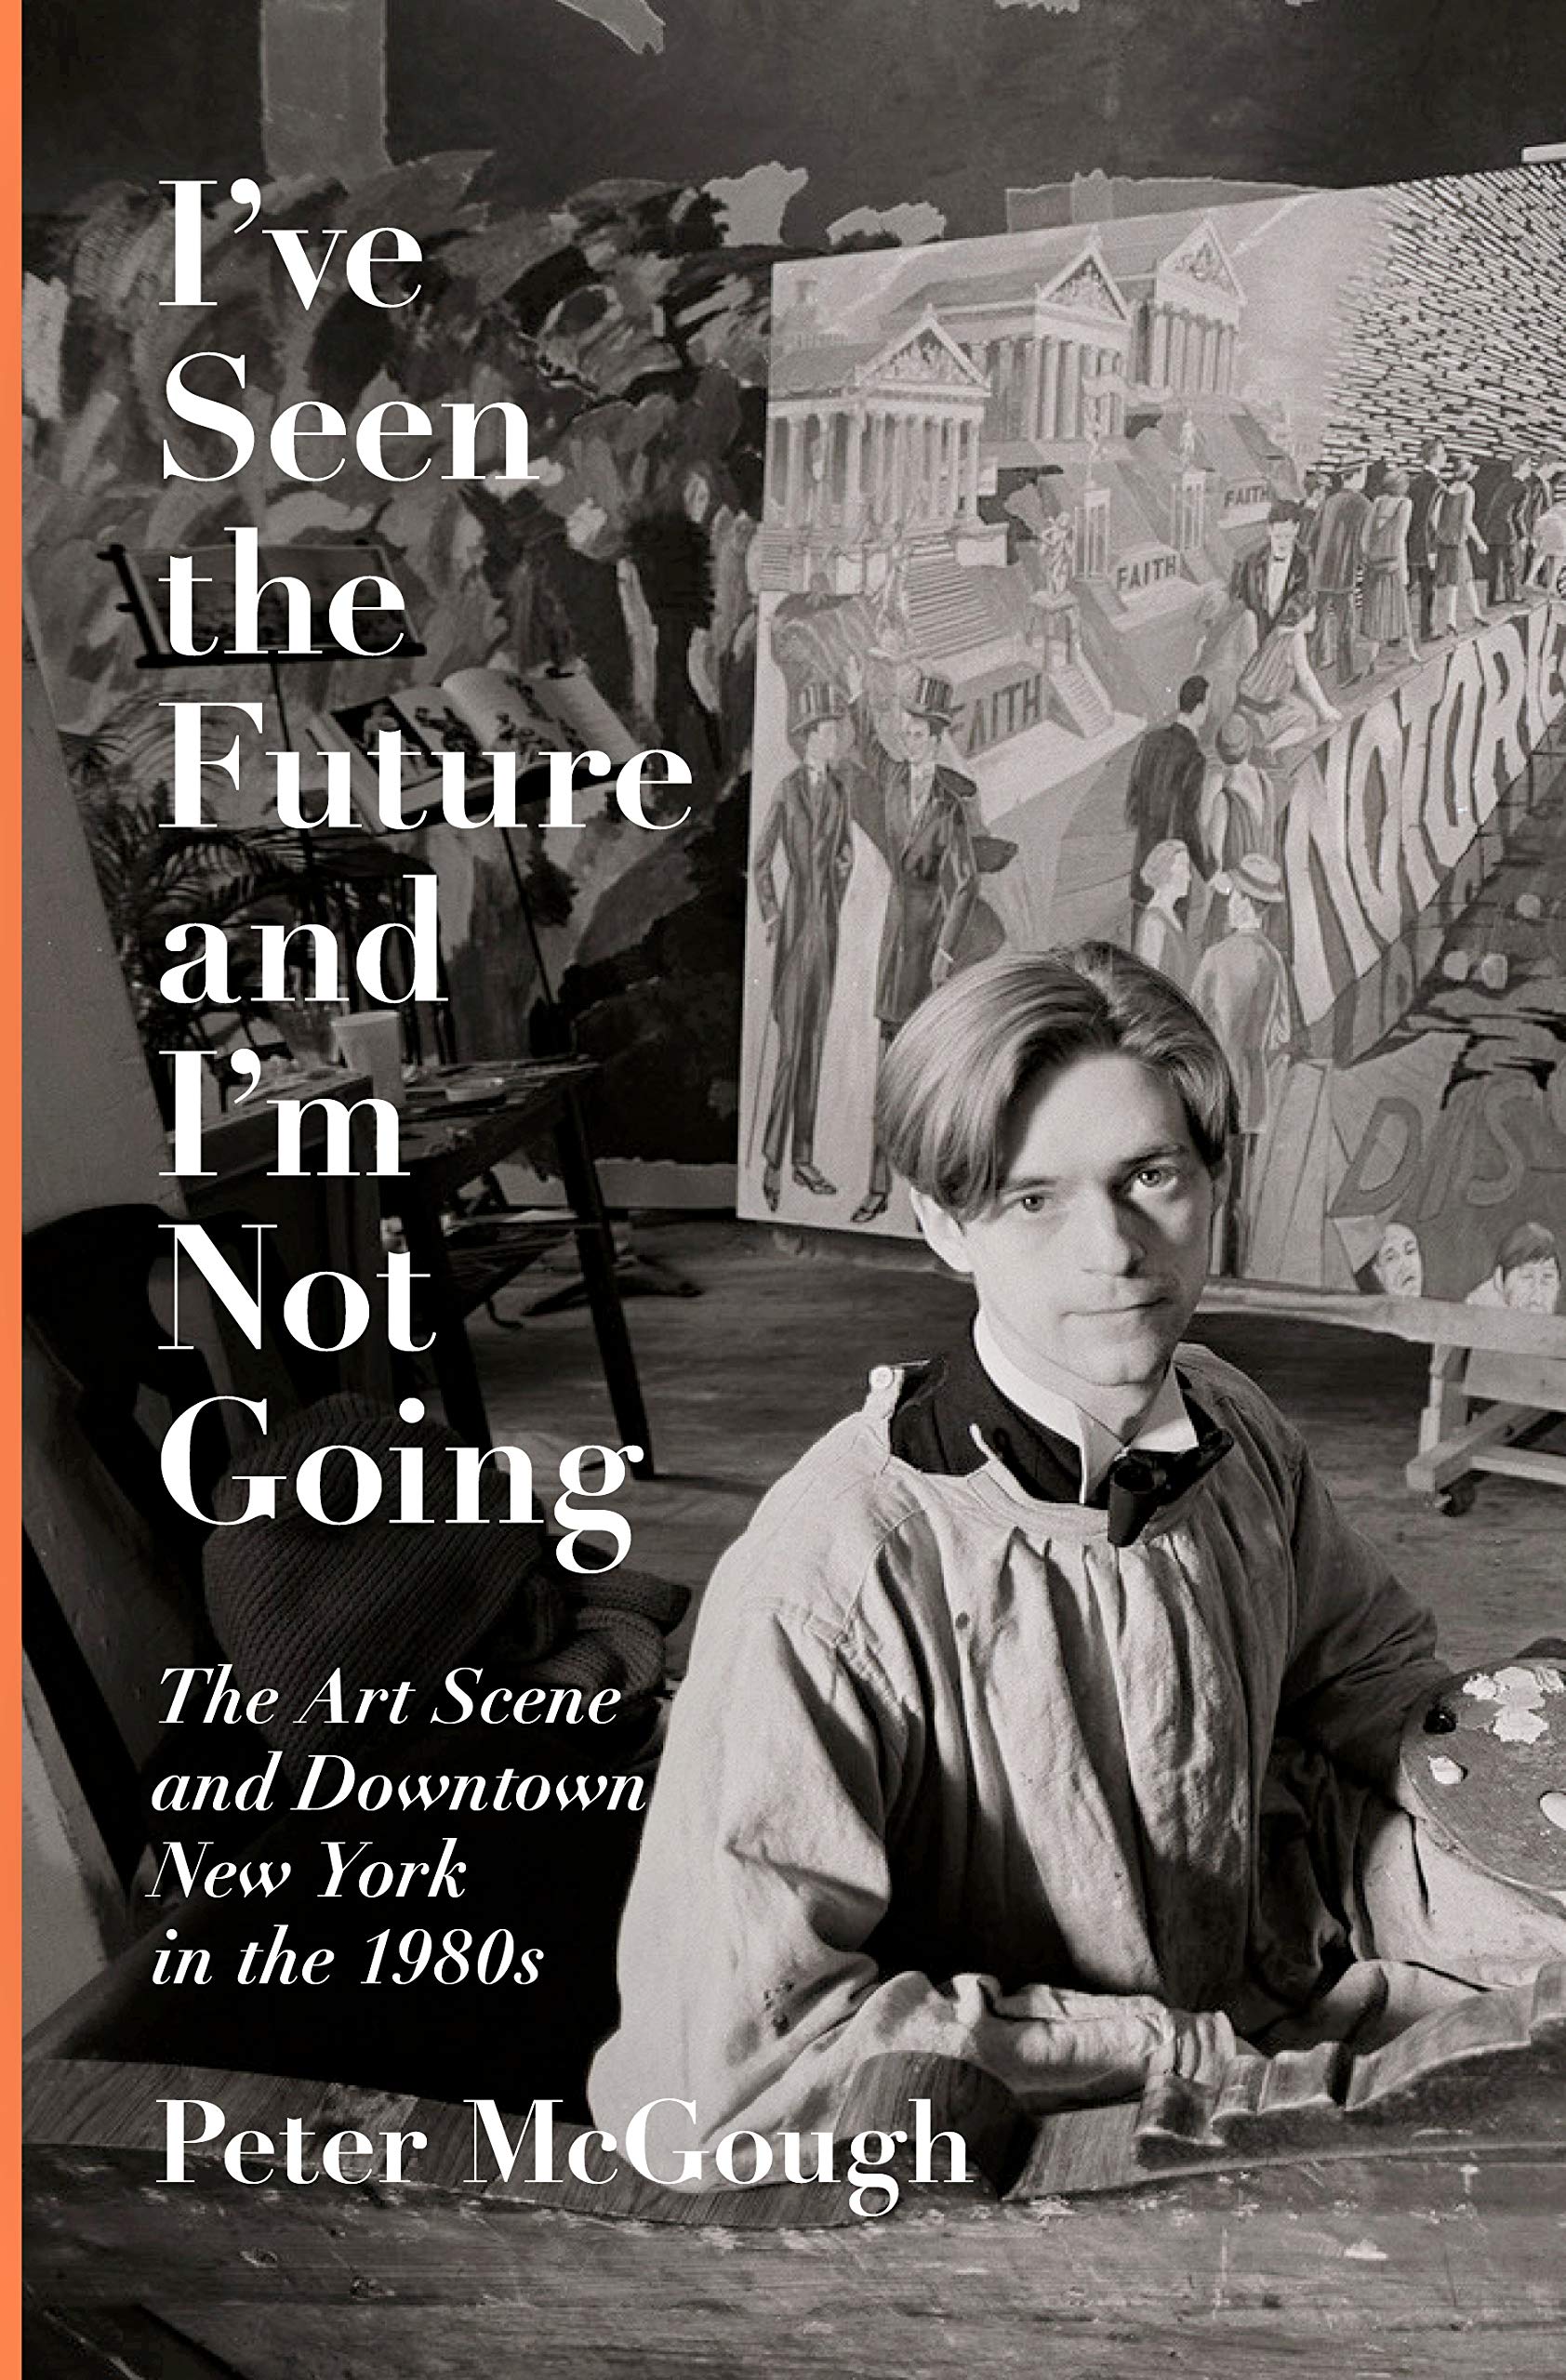 Book Launch: I've Seen The Future and I'm Not Going by Peter McGough in conversation with Christopher Bollen (Brooklyn Book Festival Bookends Event)